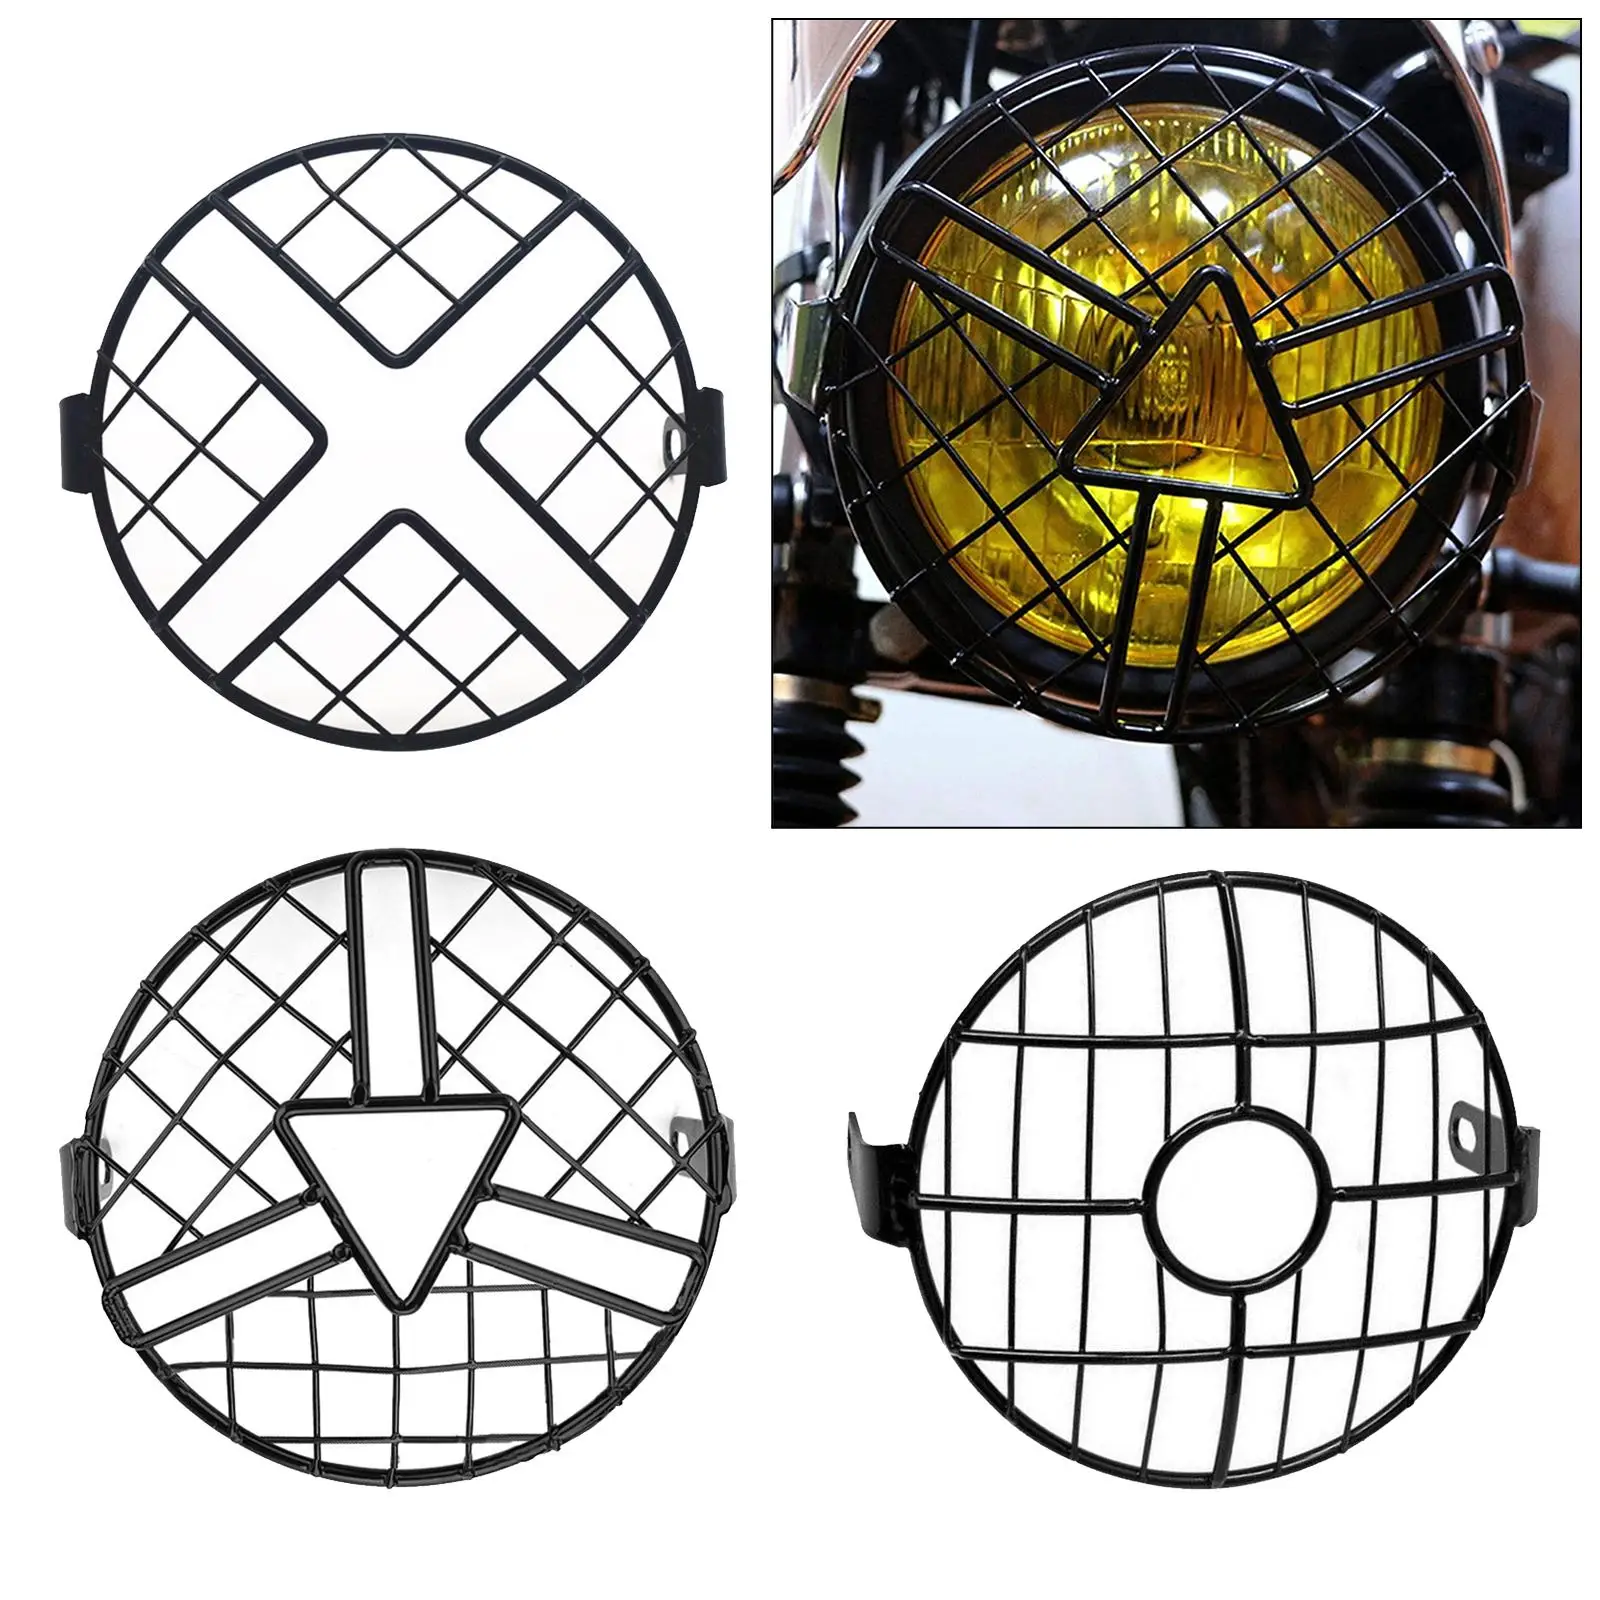 6.5 inch Motorcycle Headlight Motorbike Front Lamp Mesh Grille Cover Protector for Cafe Racer